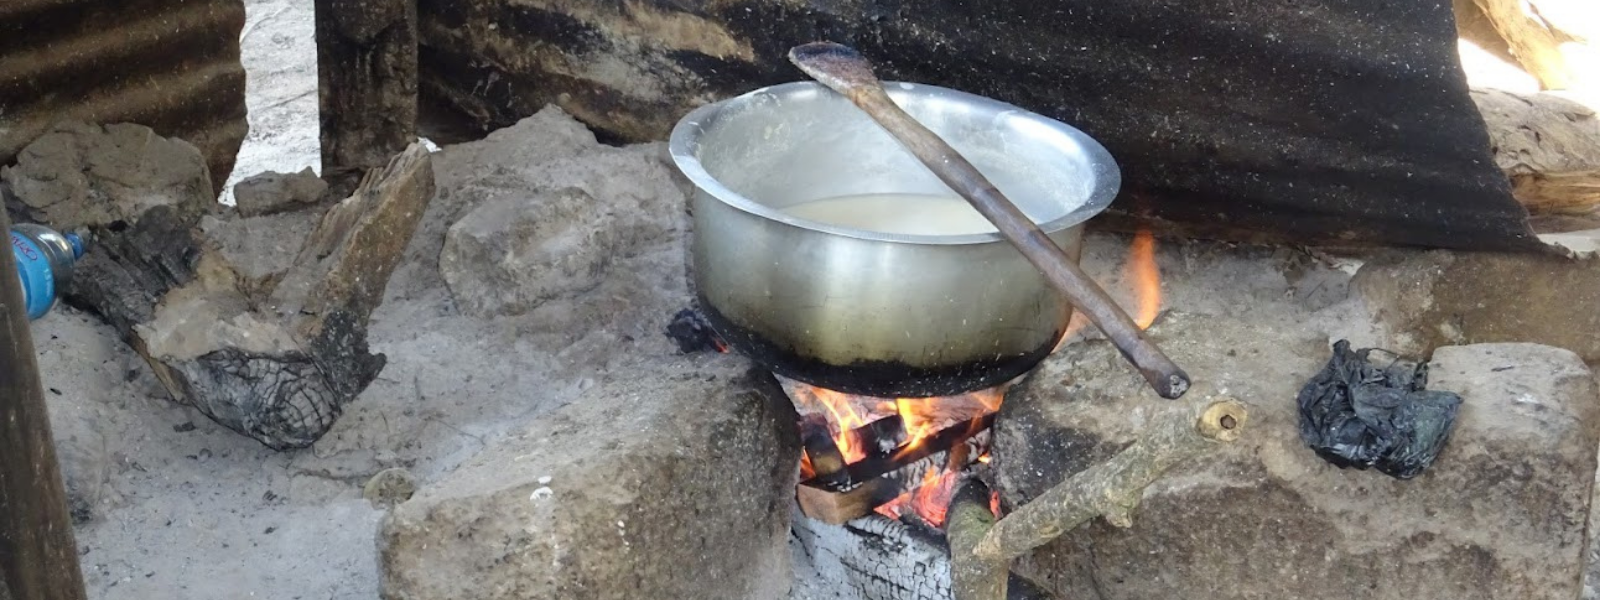 Open Fire Cooking Tips To Avoid Dangerous Consequences